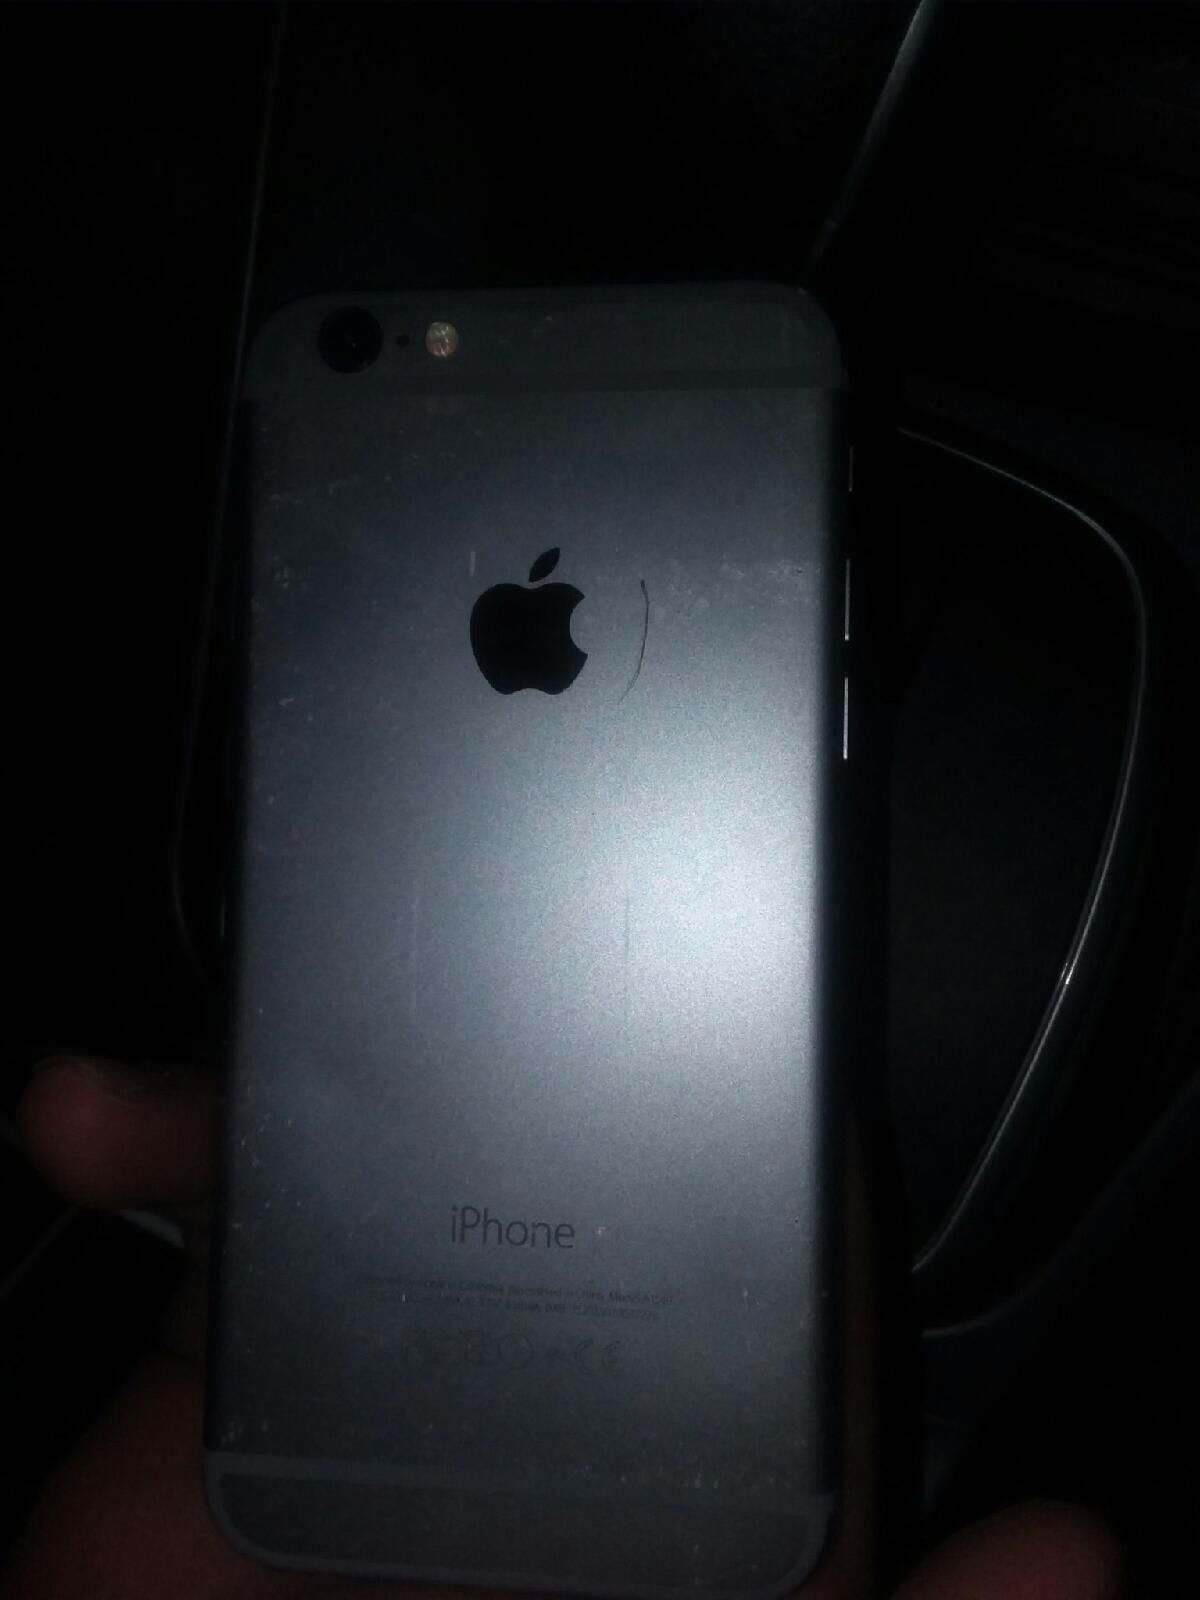 Sell IPhone 6 64 GB released with any company $135 negotiable everything works in perfect condition